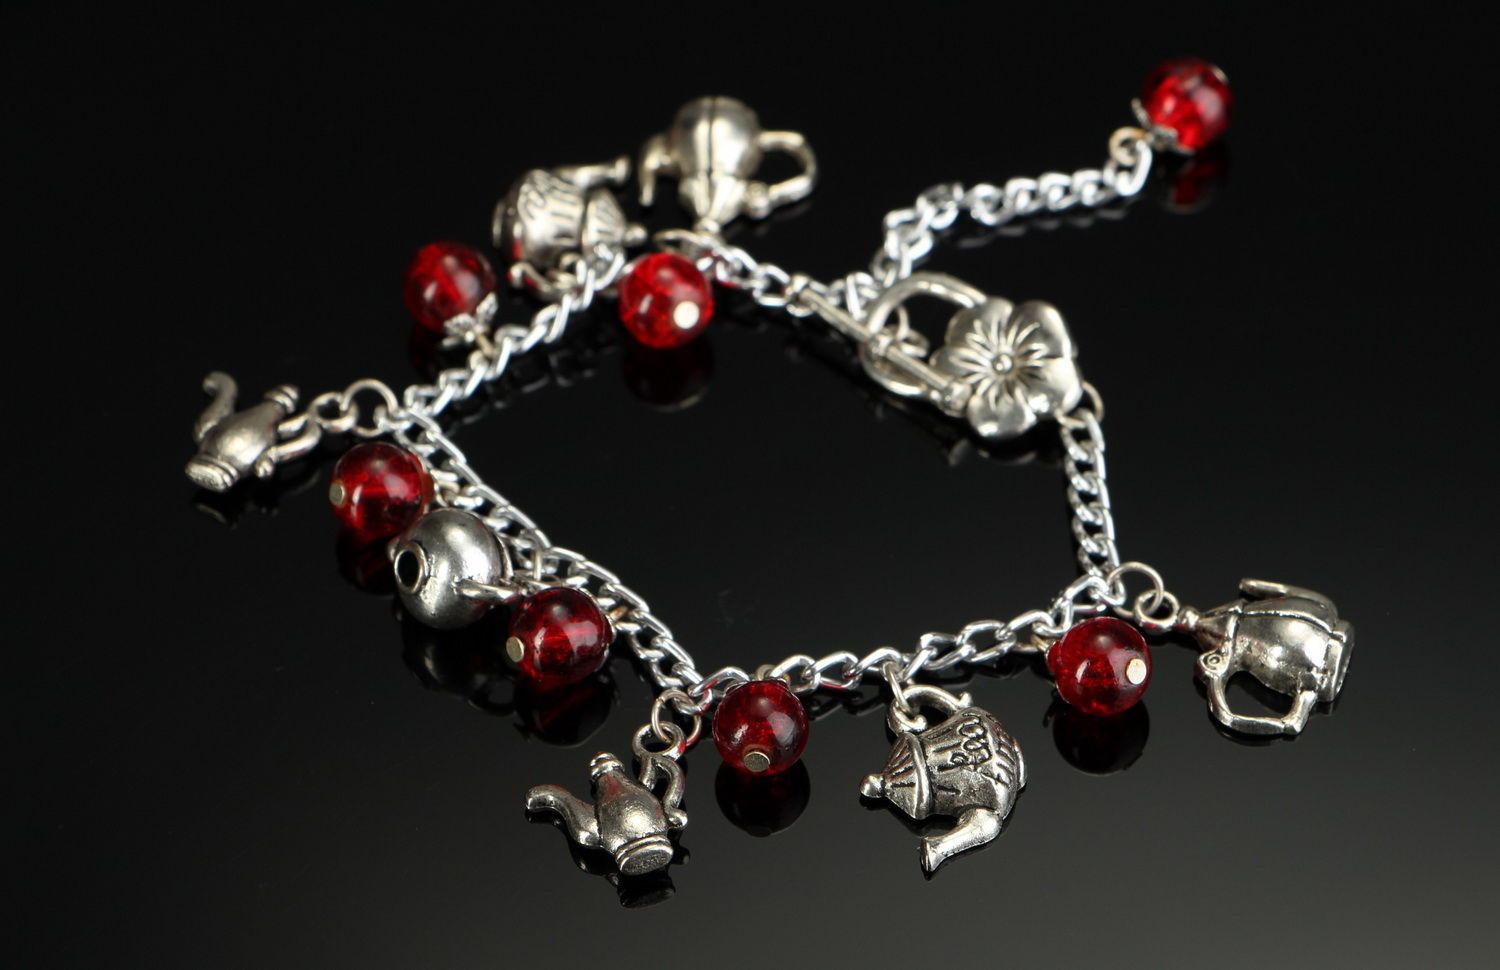 Bracelet made from steel and glass beads Tea pots photo 3